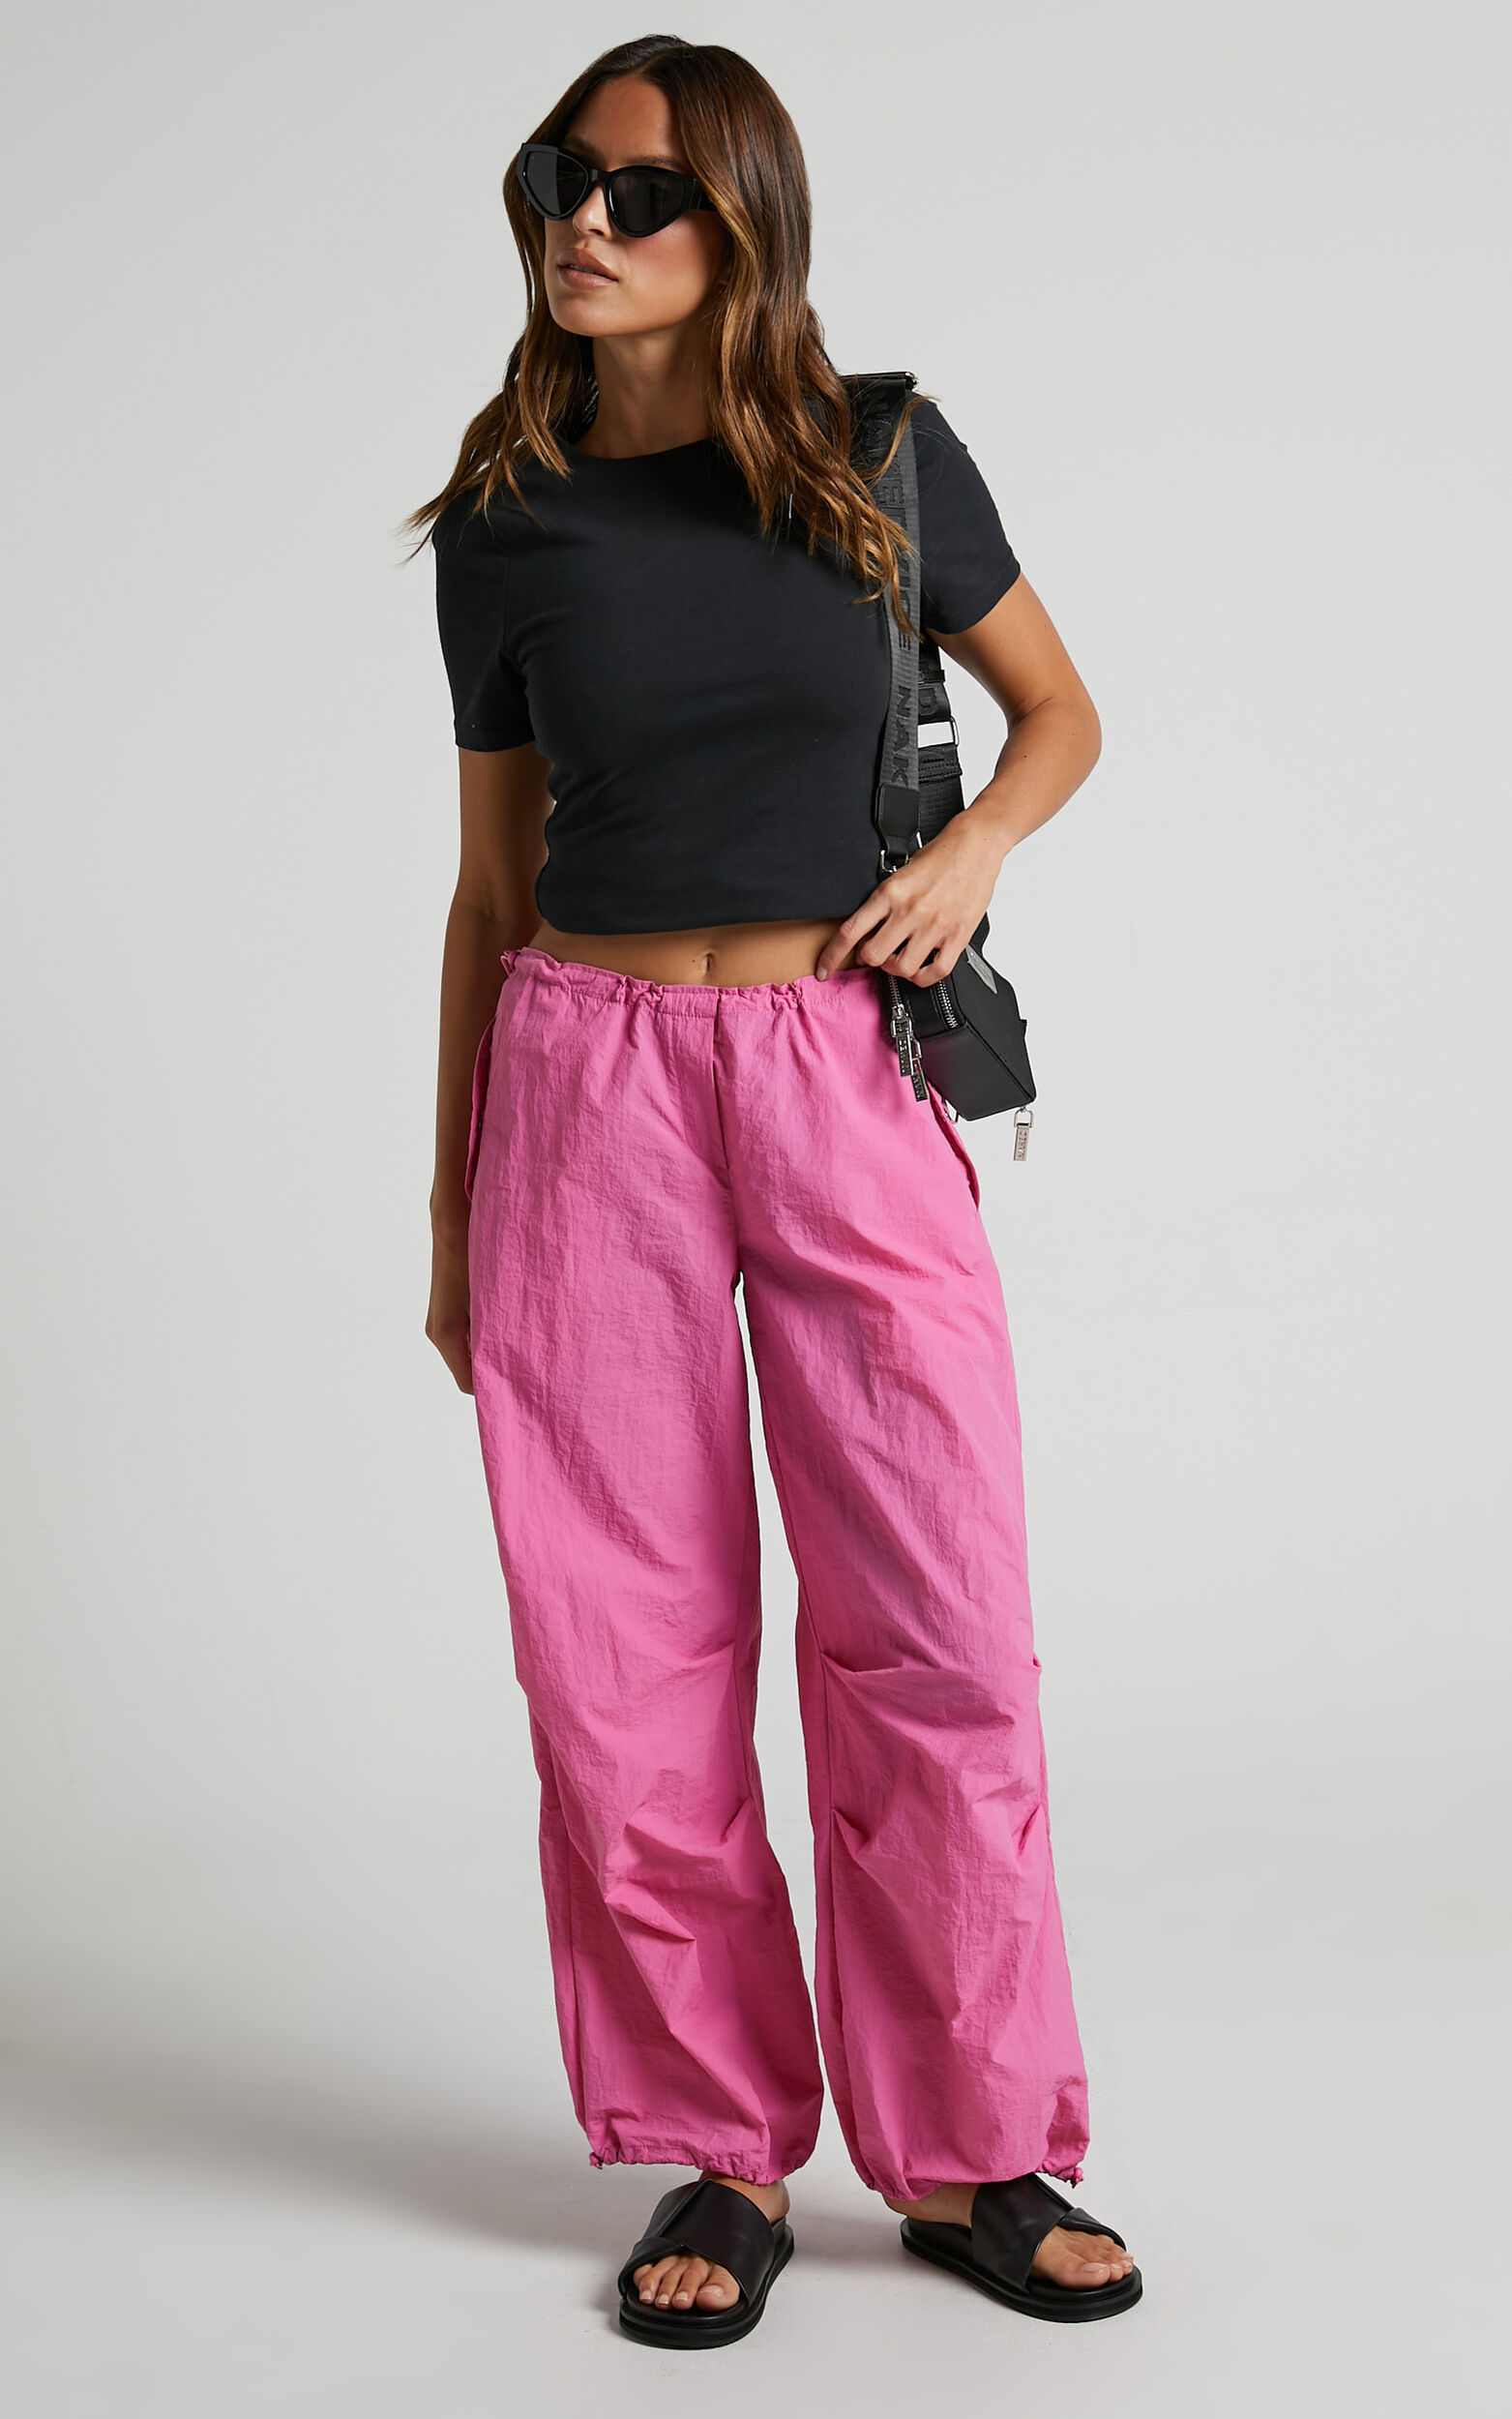 Utility Pants - Low Rise Parachute Pants in Candy Pink